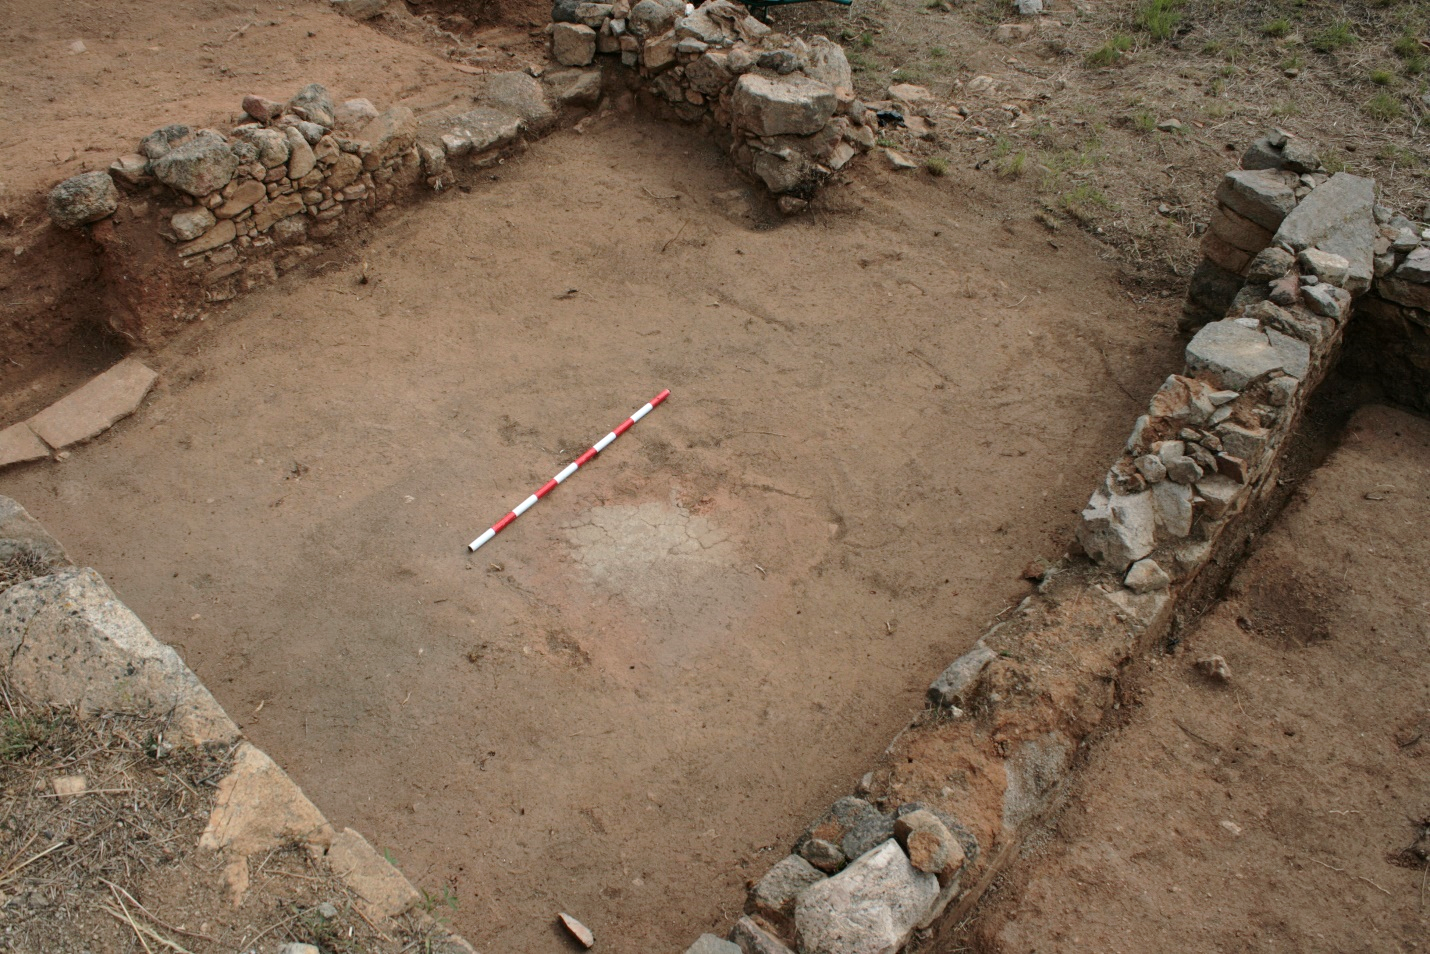 Room 4 in house 1 and its central hearth